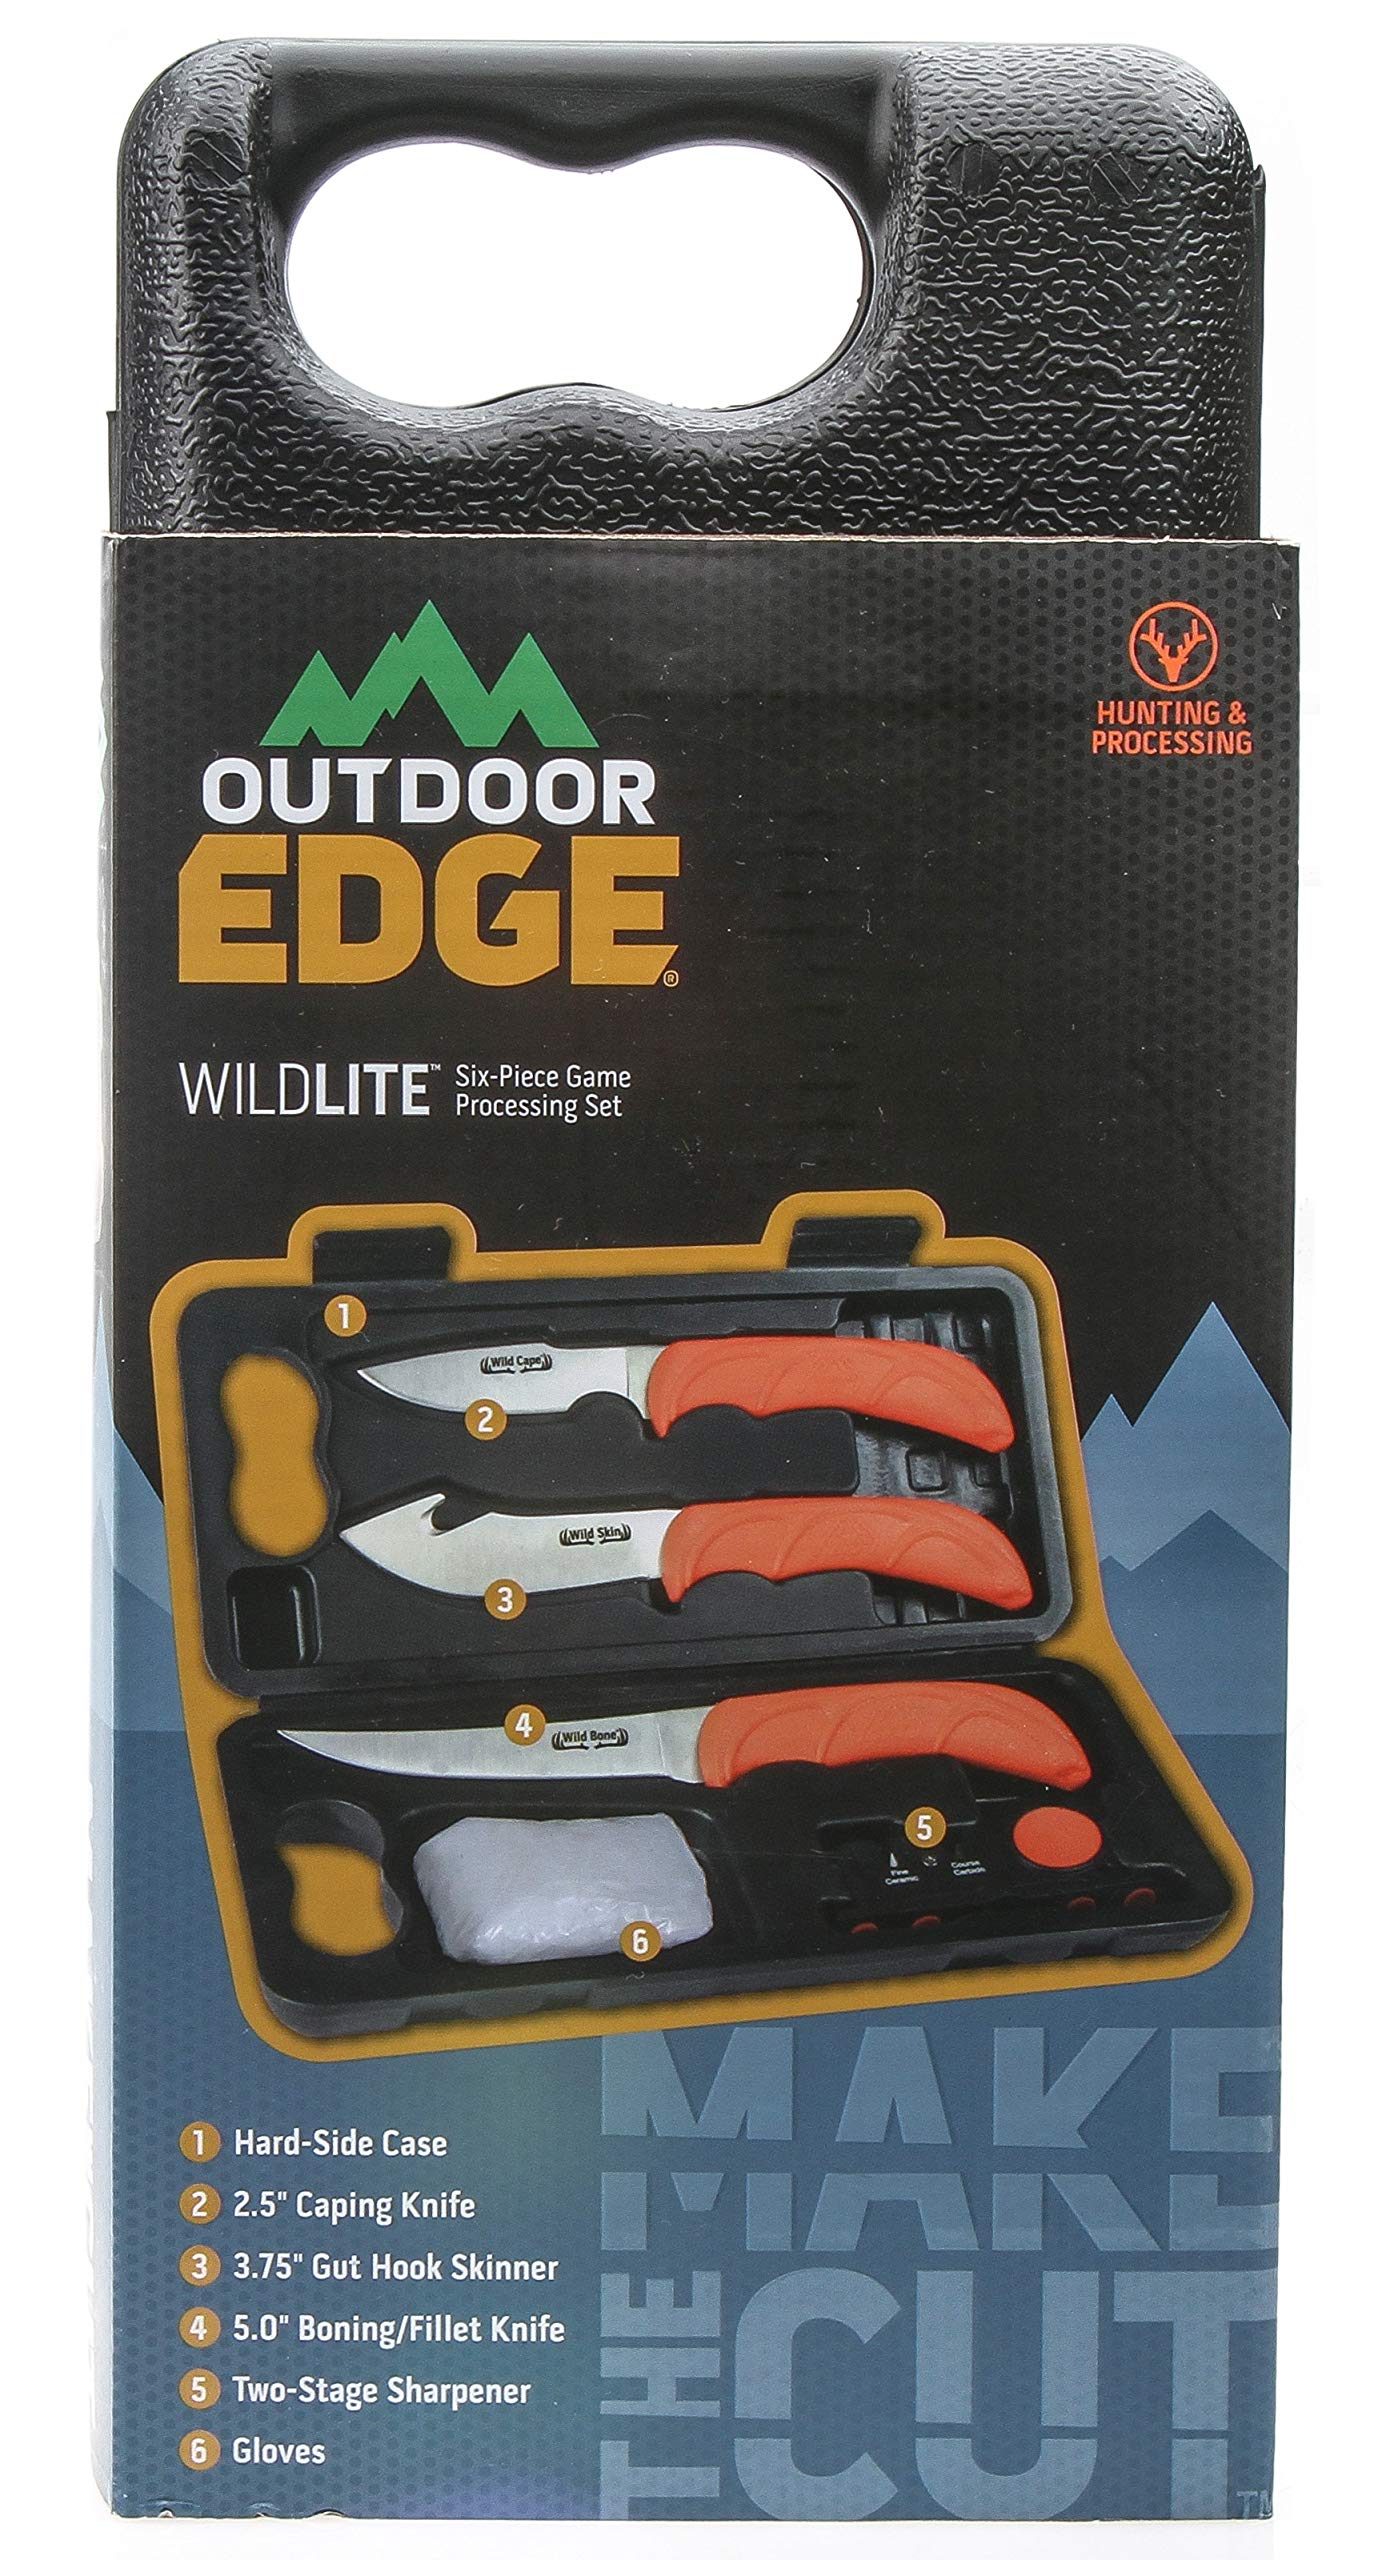 OUTDOOR EDGE WildLite 6-Piece Hunting Knife Set. Includes Skinning Knife, Boning & Caping Knives, & Sharpener all in a Compact Hard Side Case. Perfect Field Dressing Kit for Deer, Elk, Poultry & More